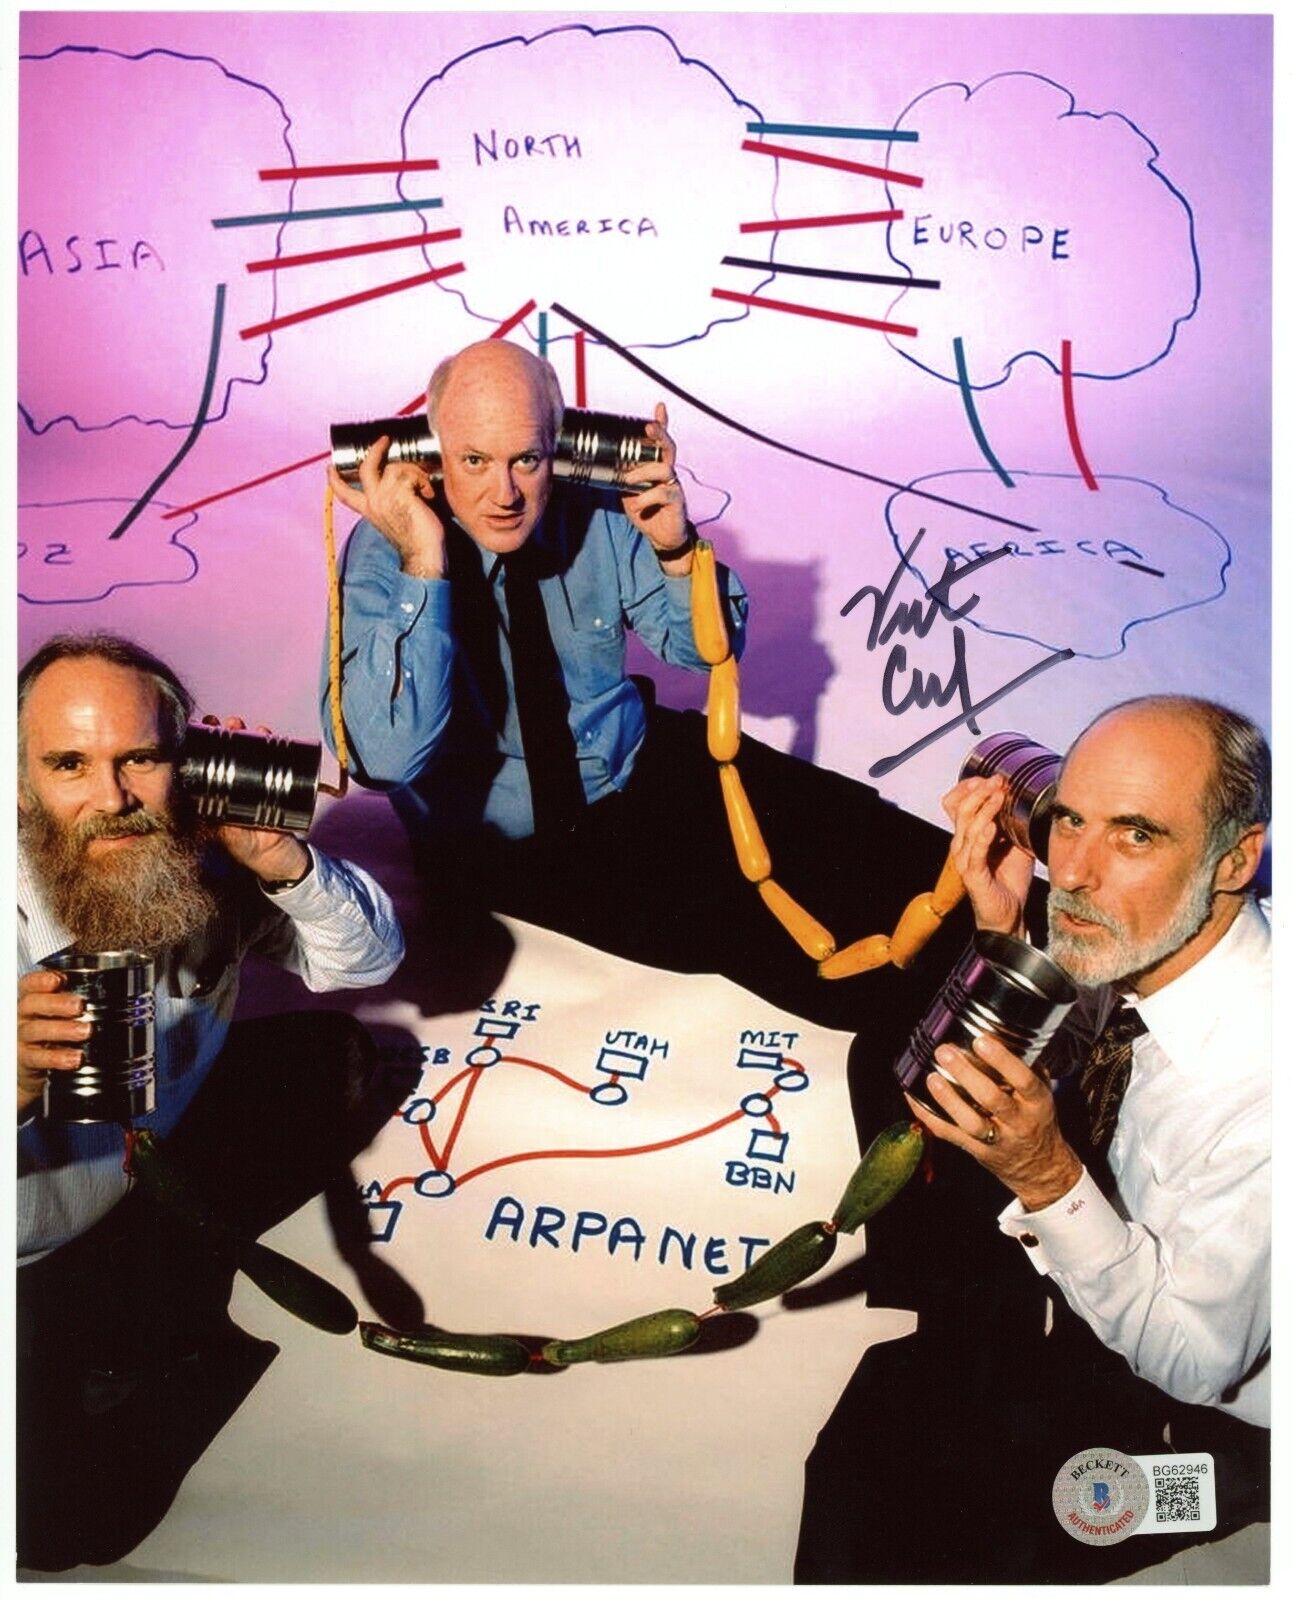 VINT CERF Signed 8X10 Photo - Father of the Internet -Google VP TCP/IP -BECKETT